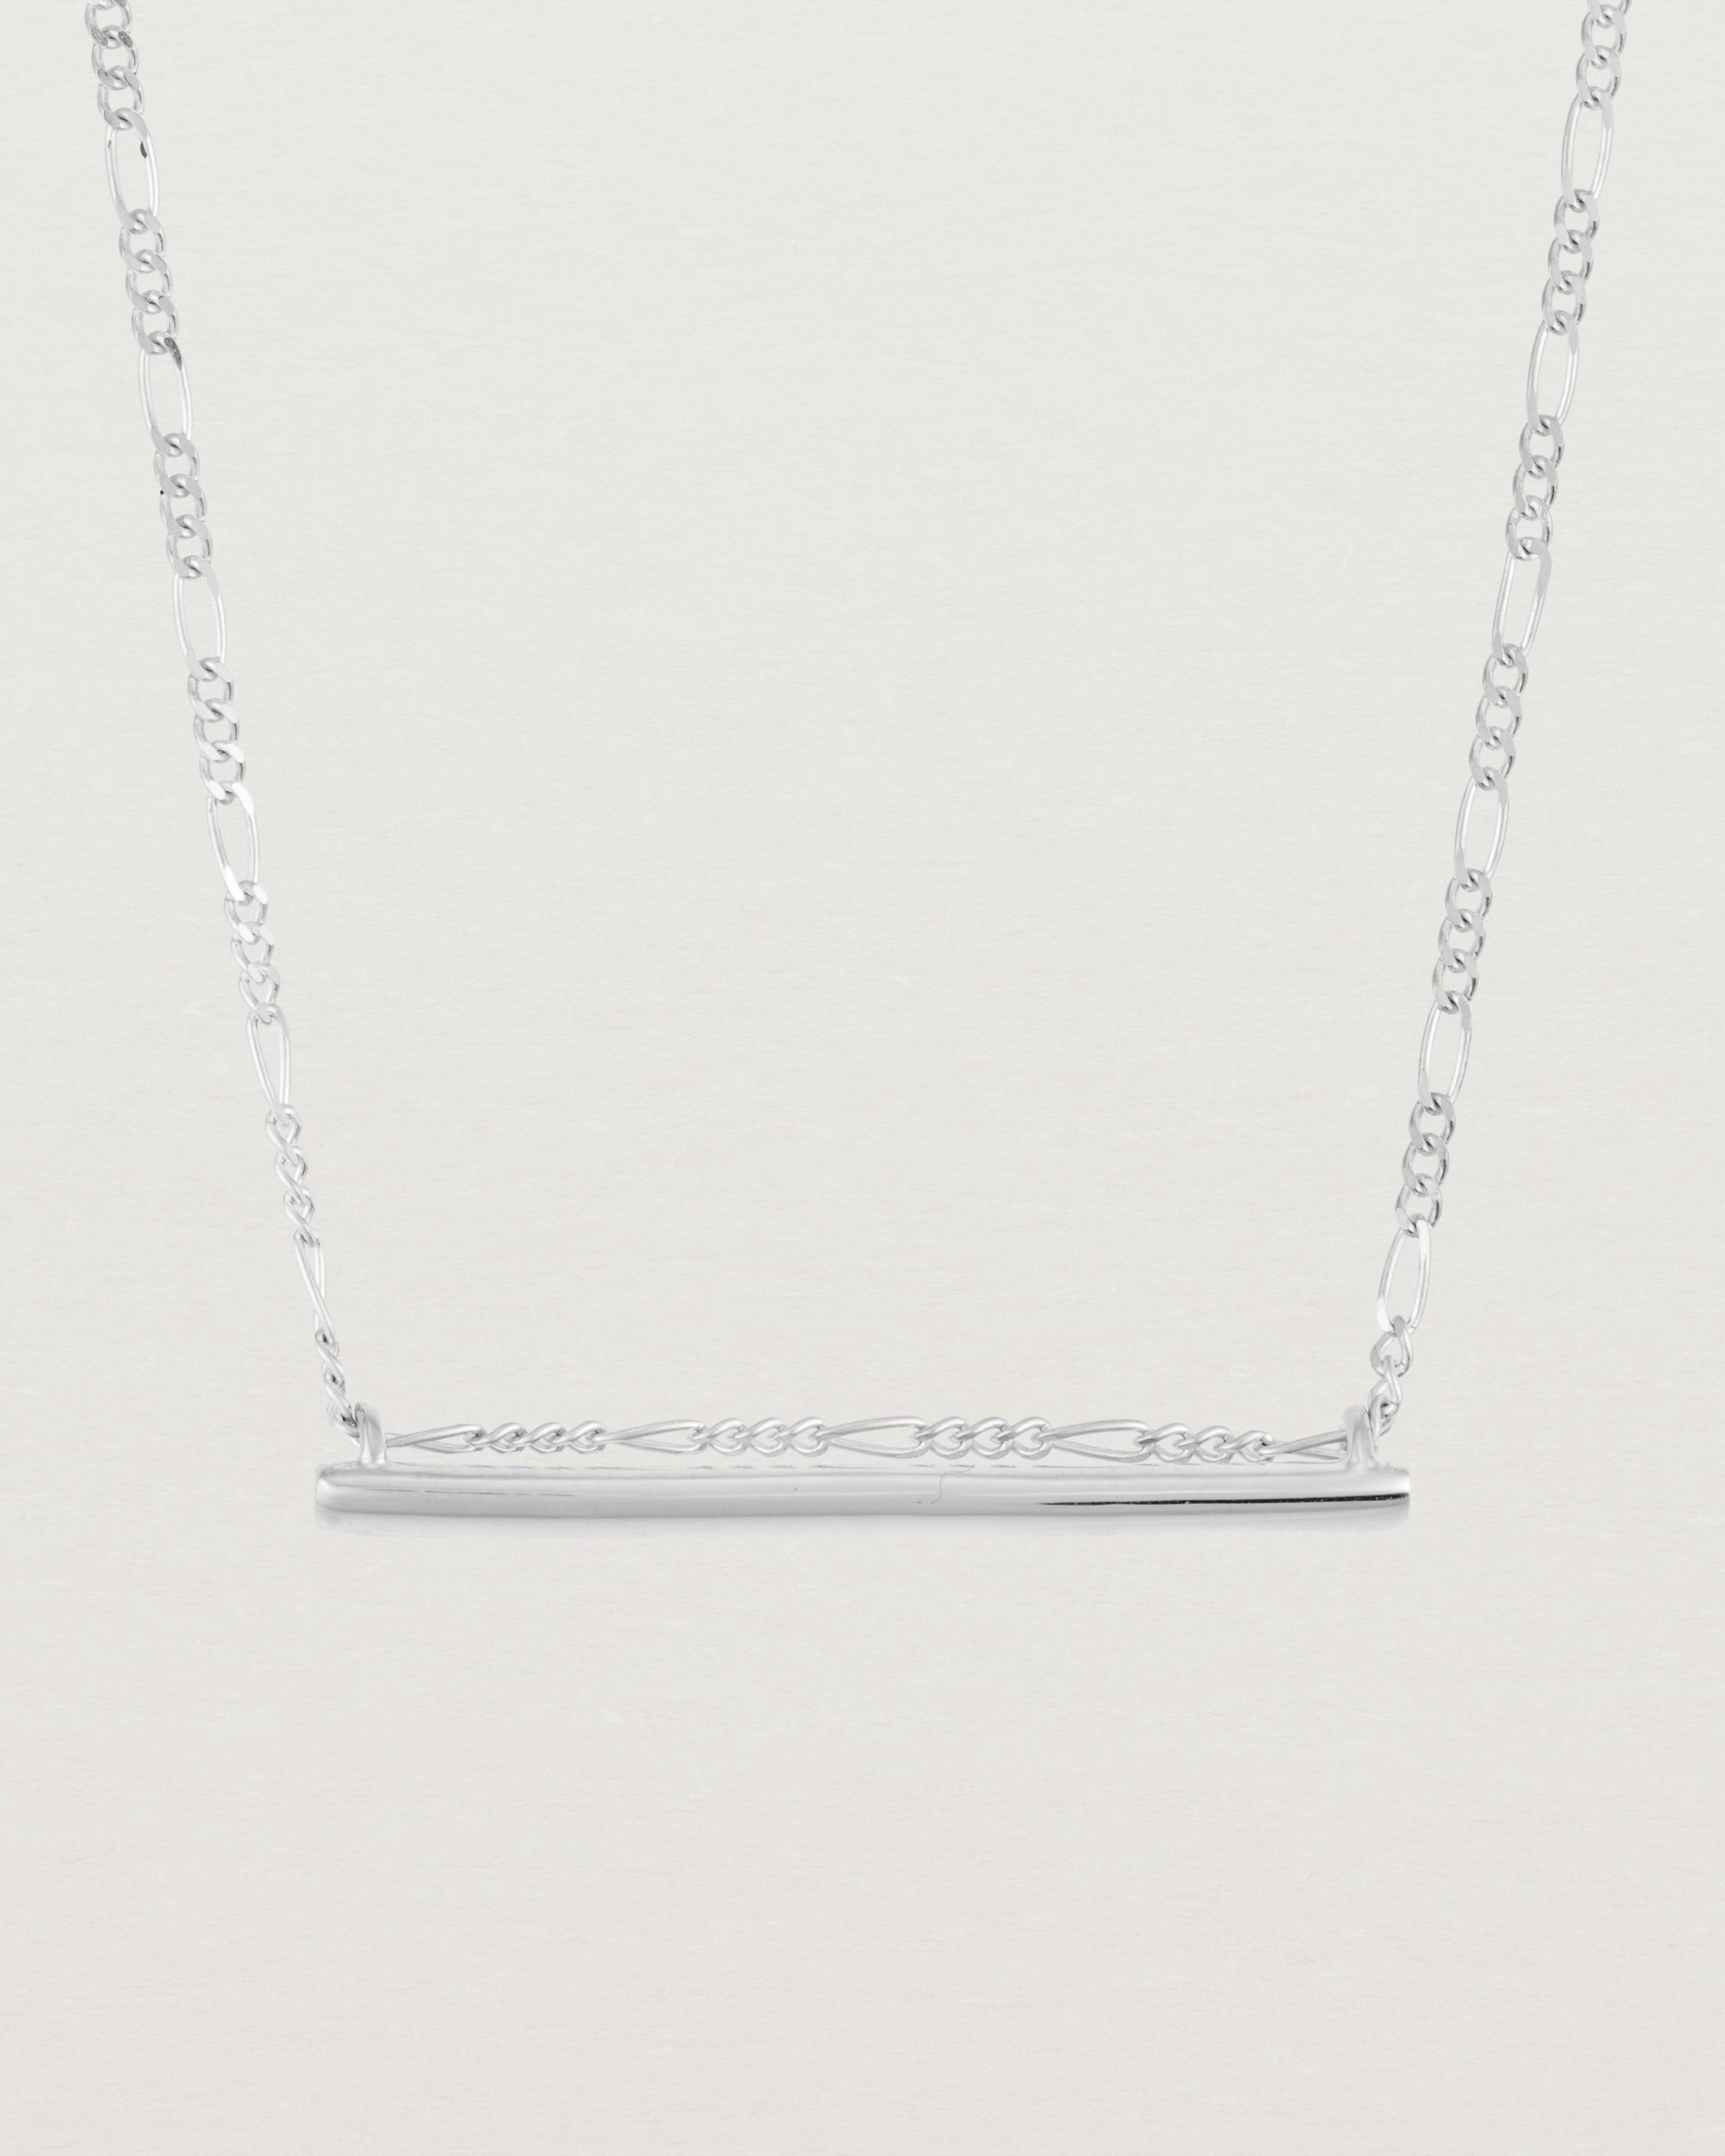 close up of Ellipse necklace with a silver bar hanging from a chain in sterling silver